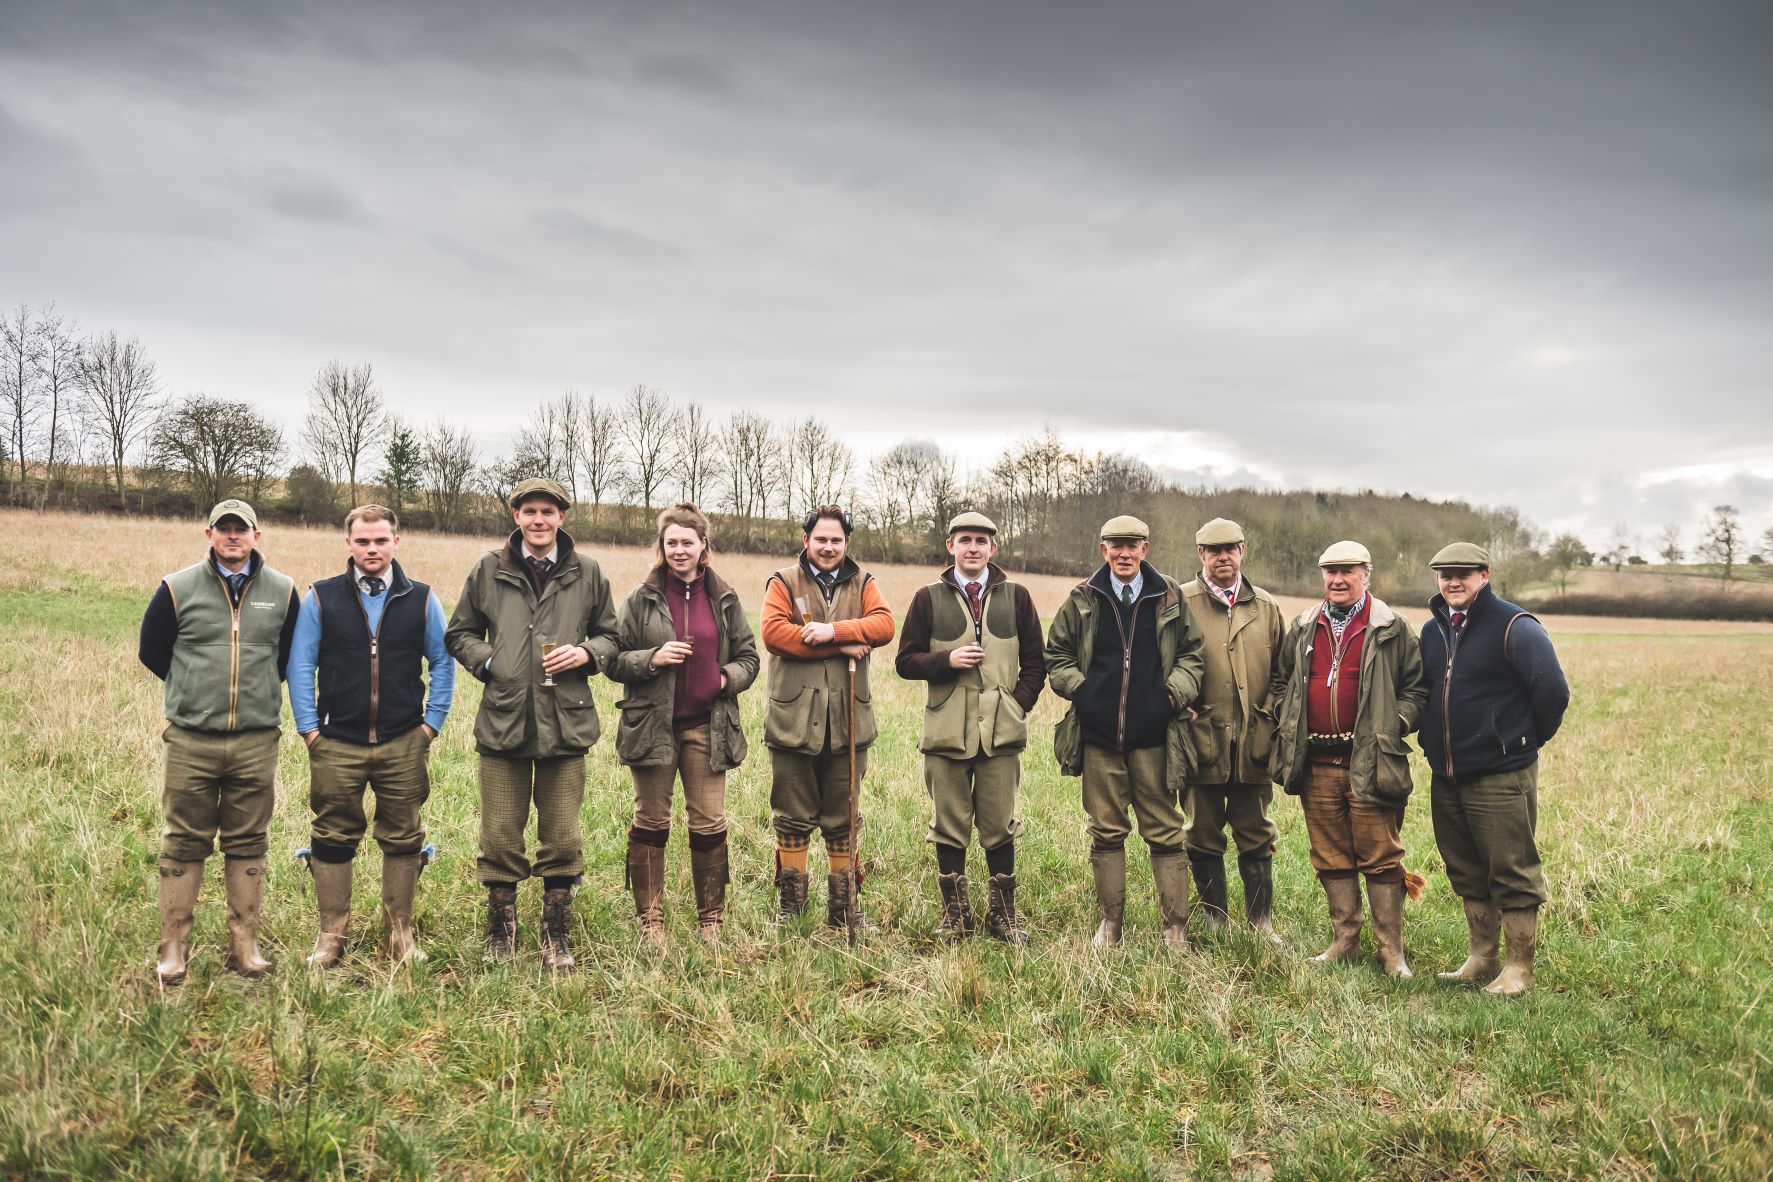 group of people standing in green grass field wearing tweed and wellies